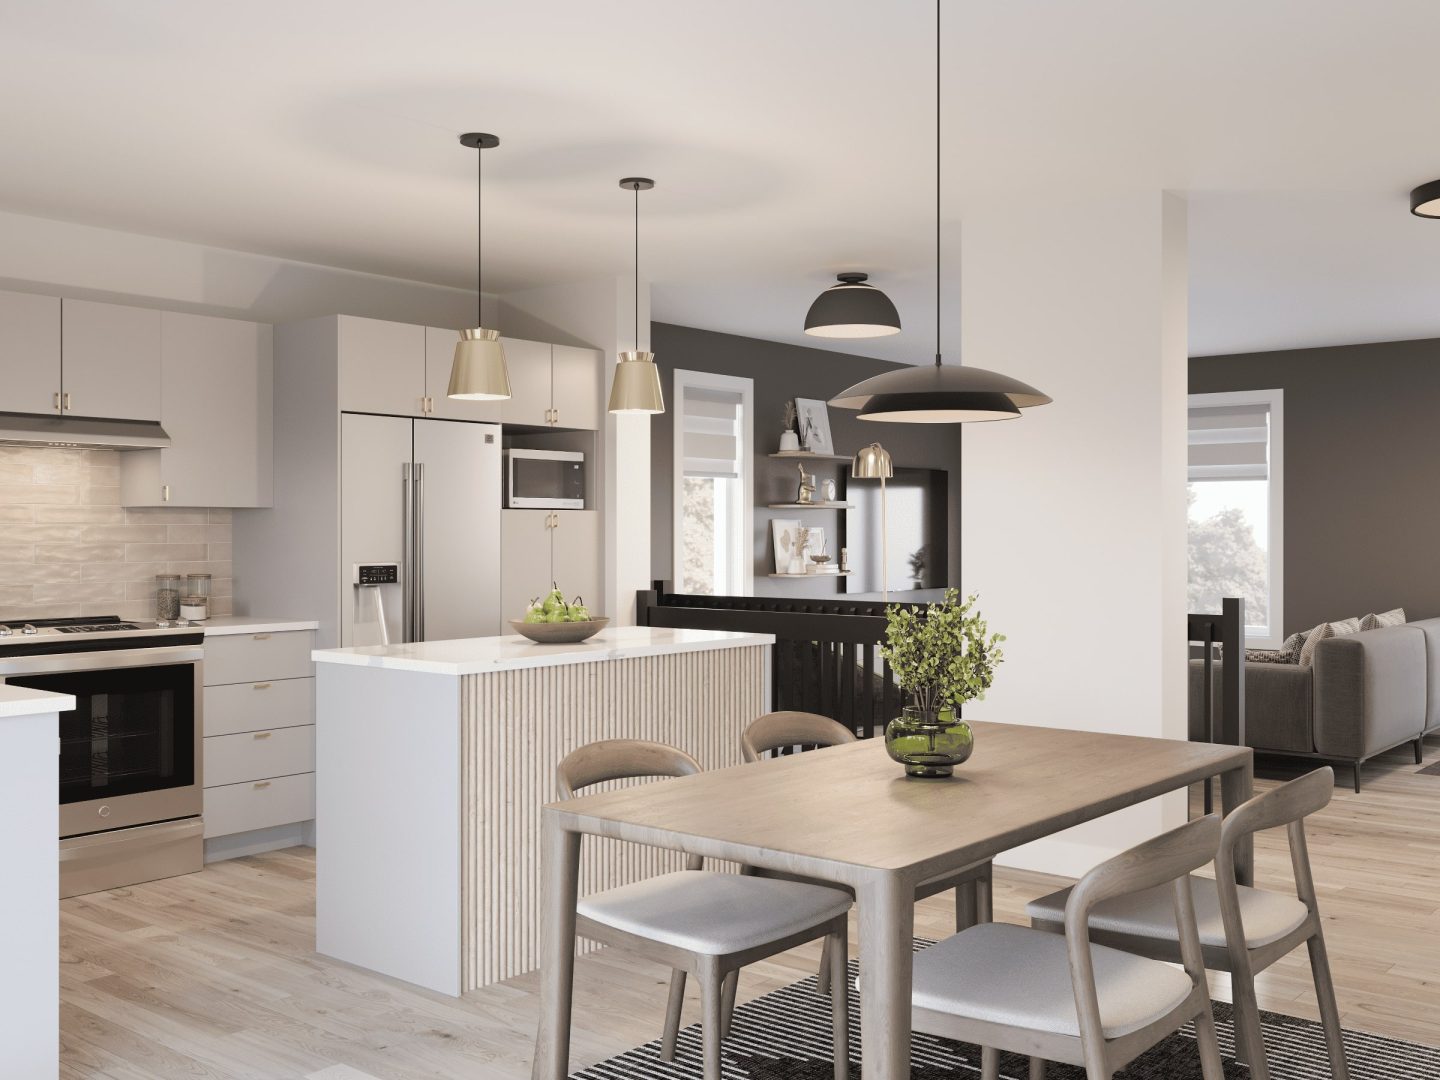 The Pixie model is a contemporary single-storey home. Kitchen view